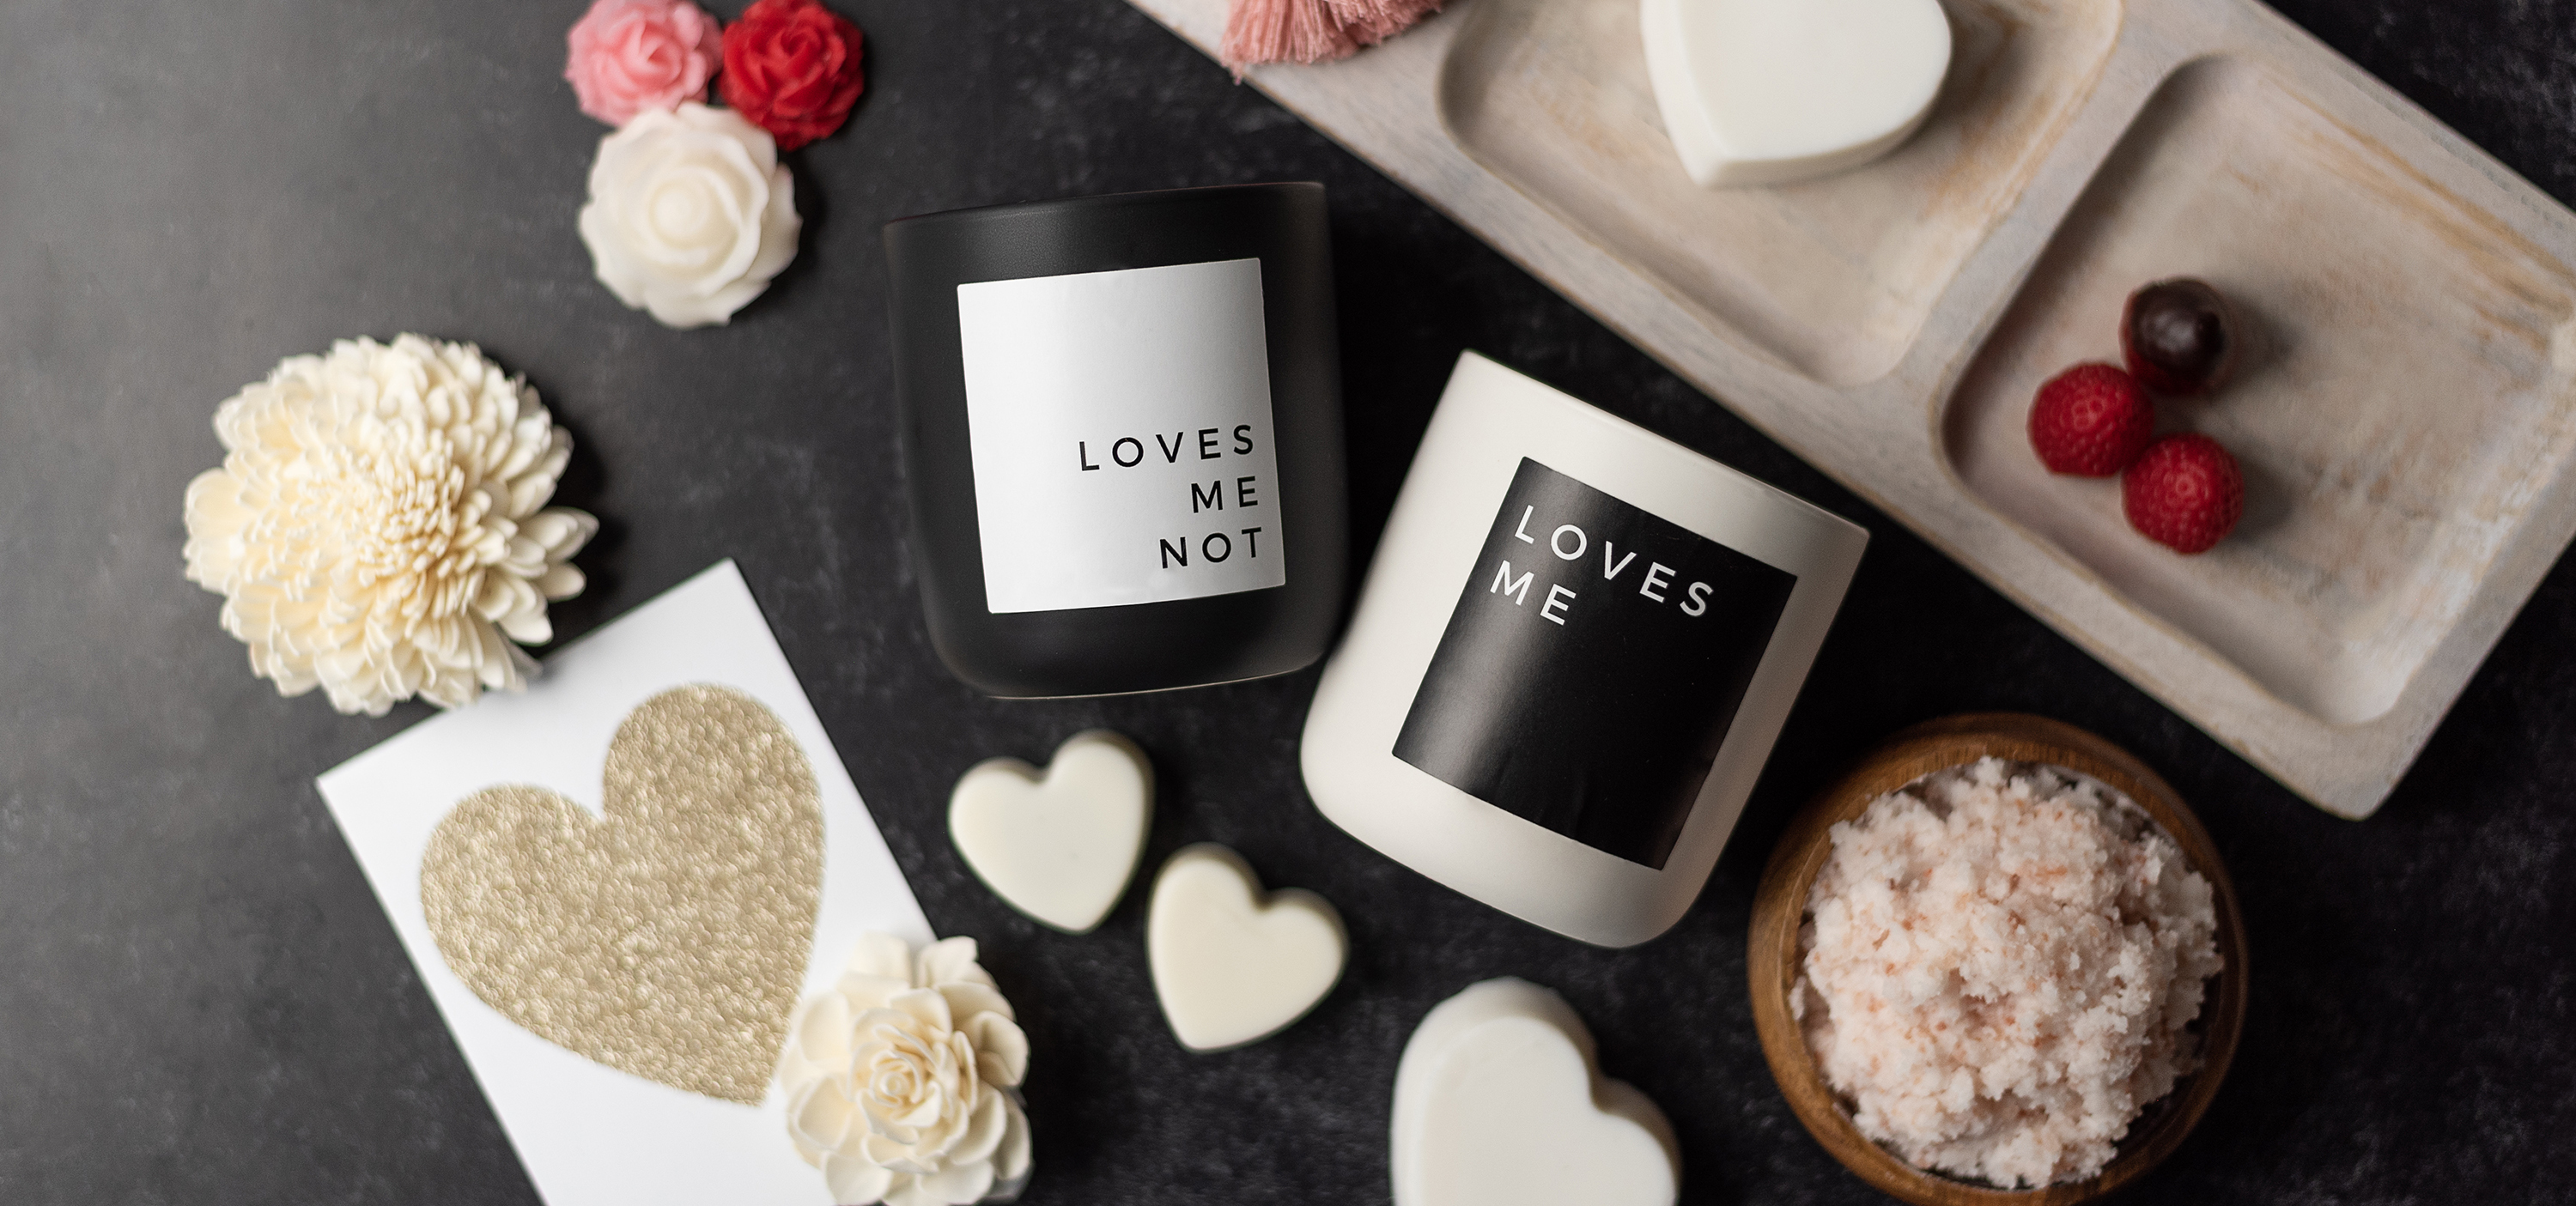 Valentine's Day inspired candles, melts, and salt scrub.